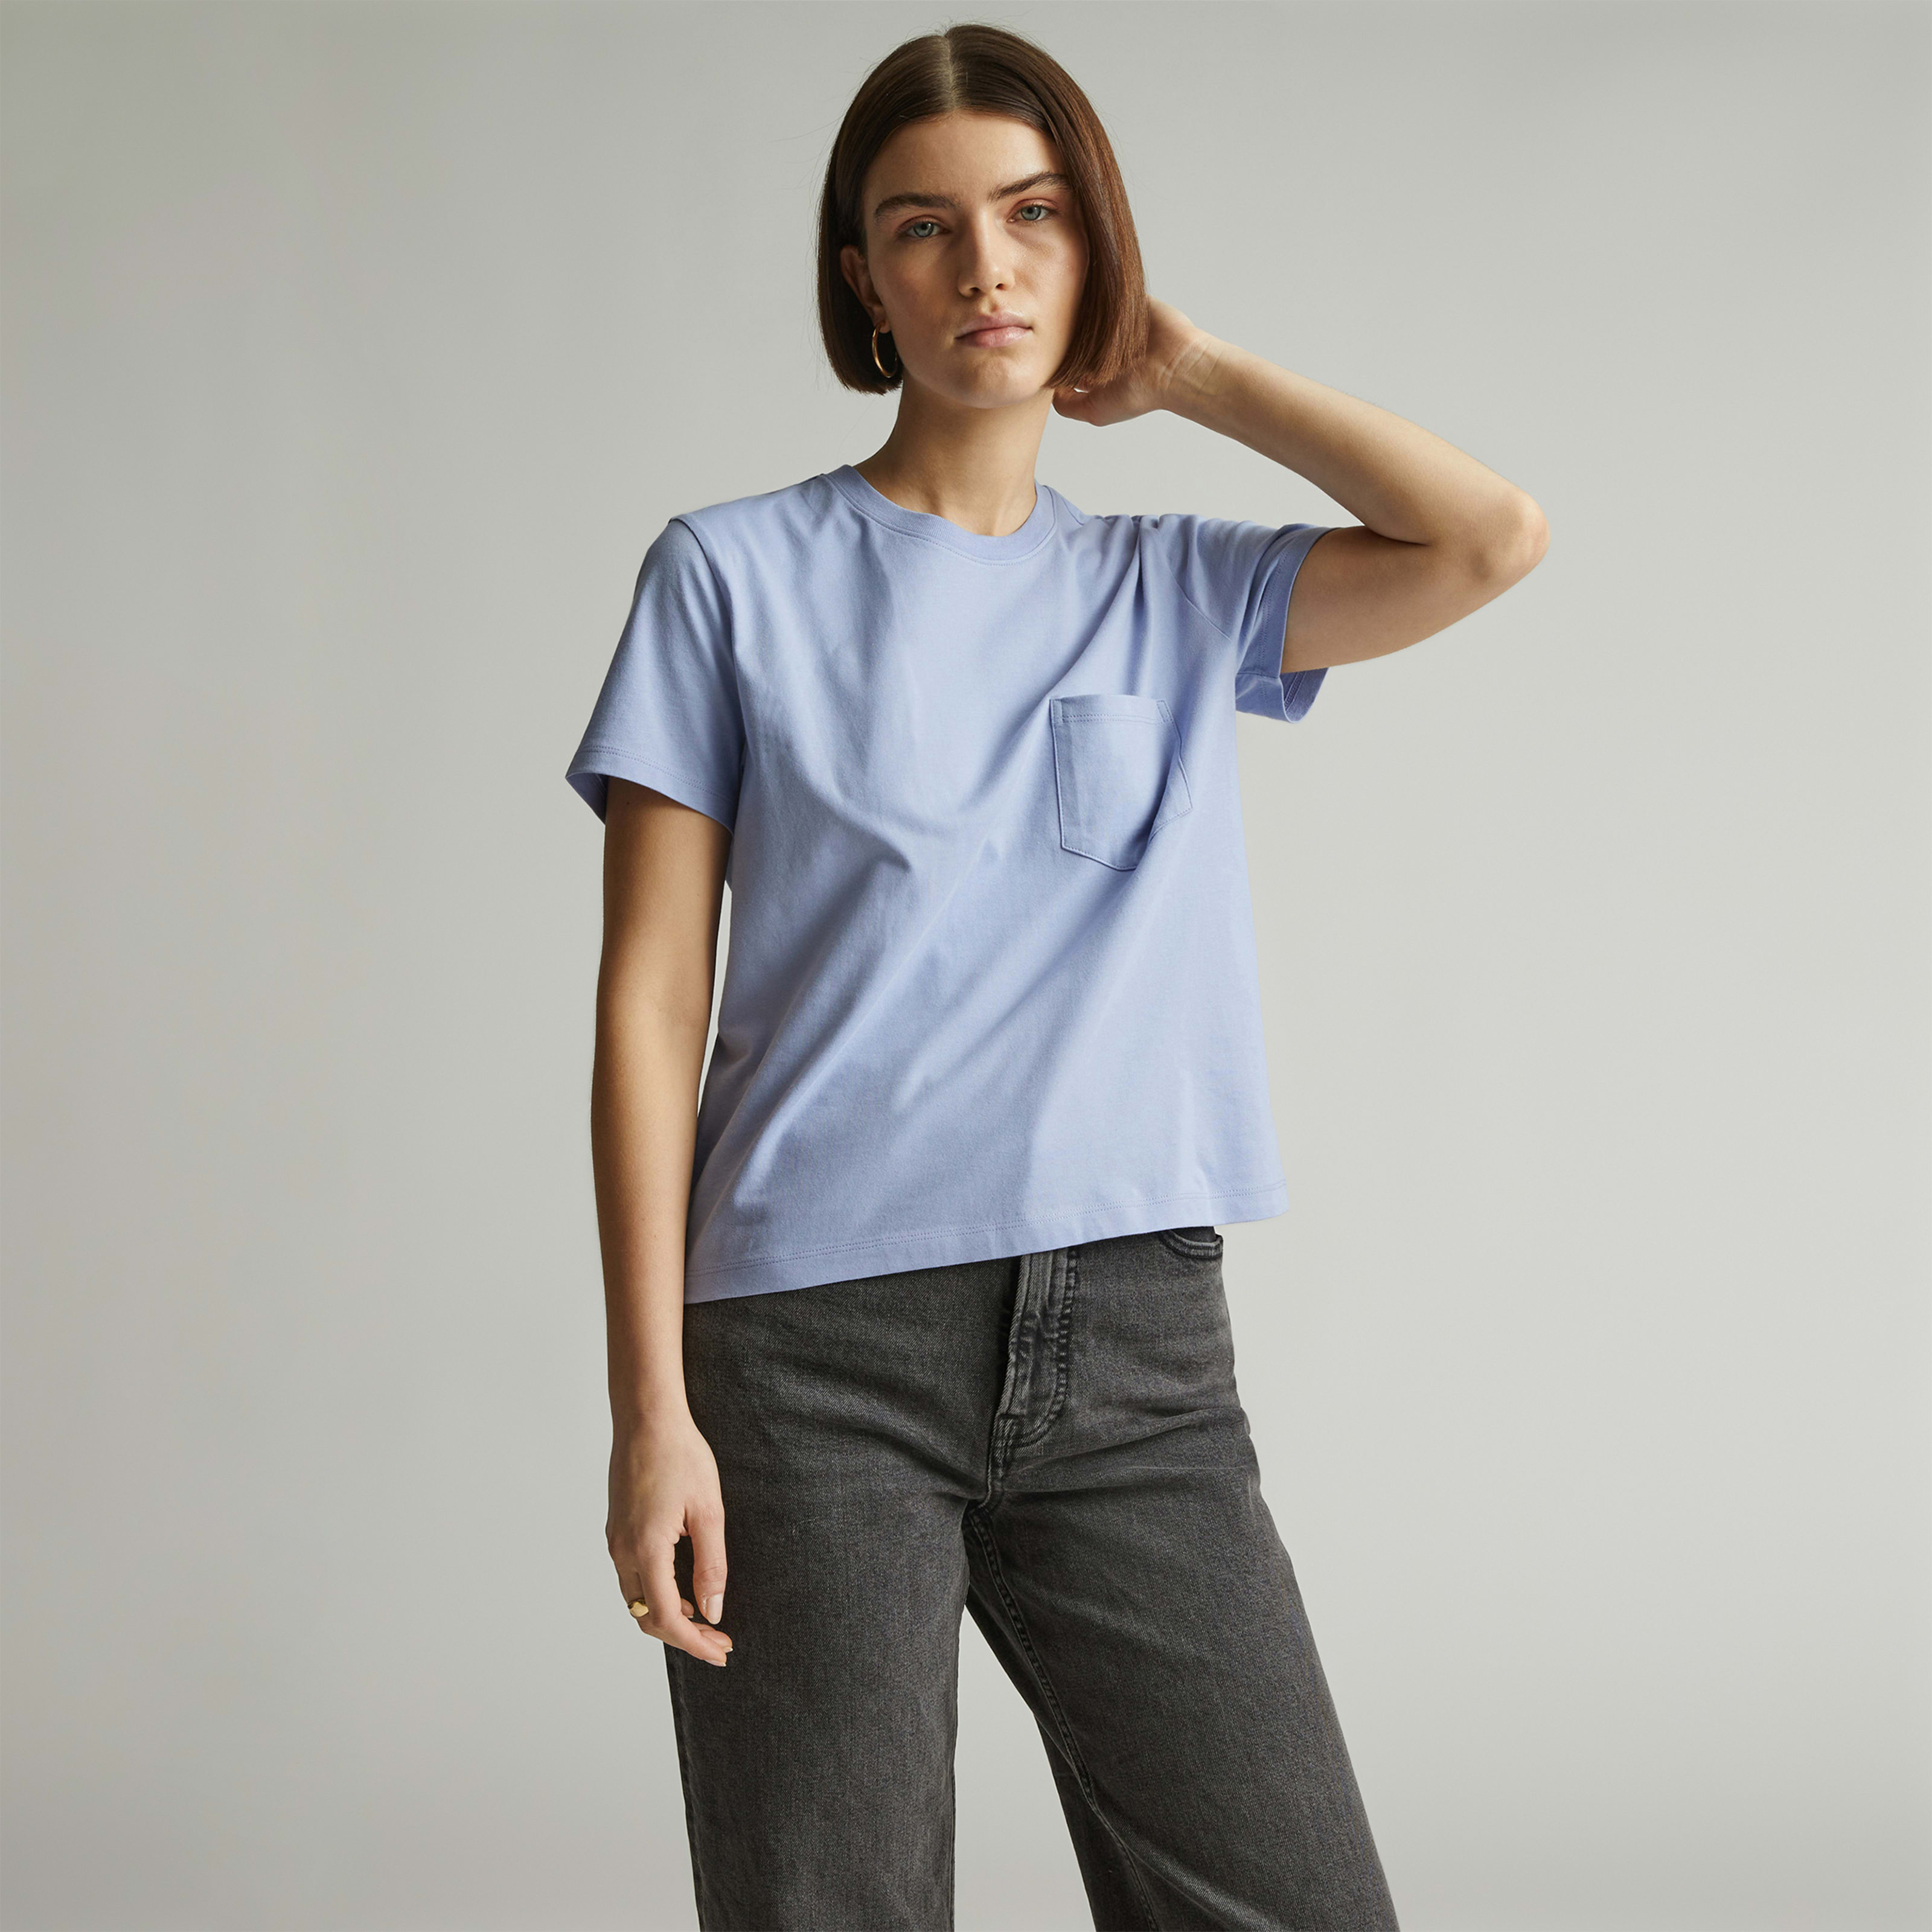 women's organic cotton box-cut t-shirt by everlane in periwinkle, size xs